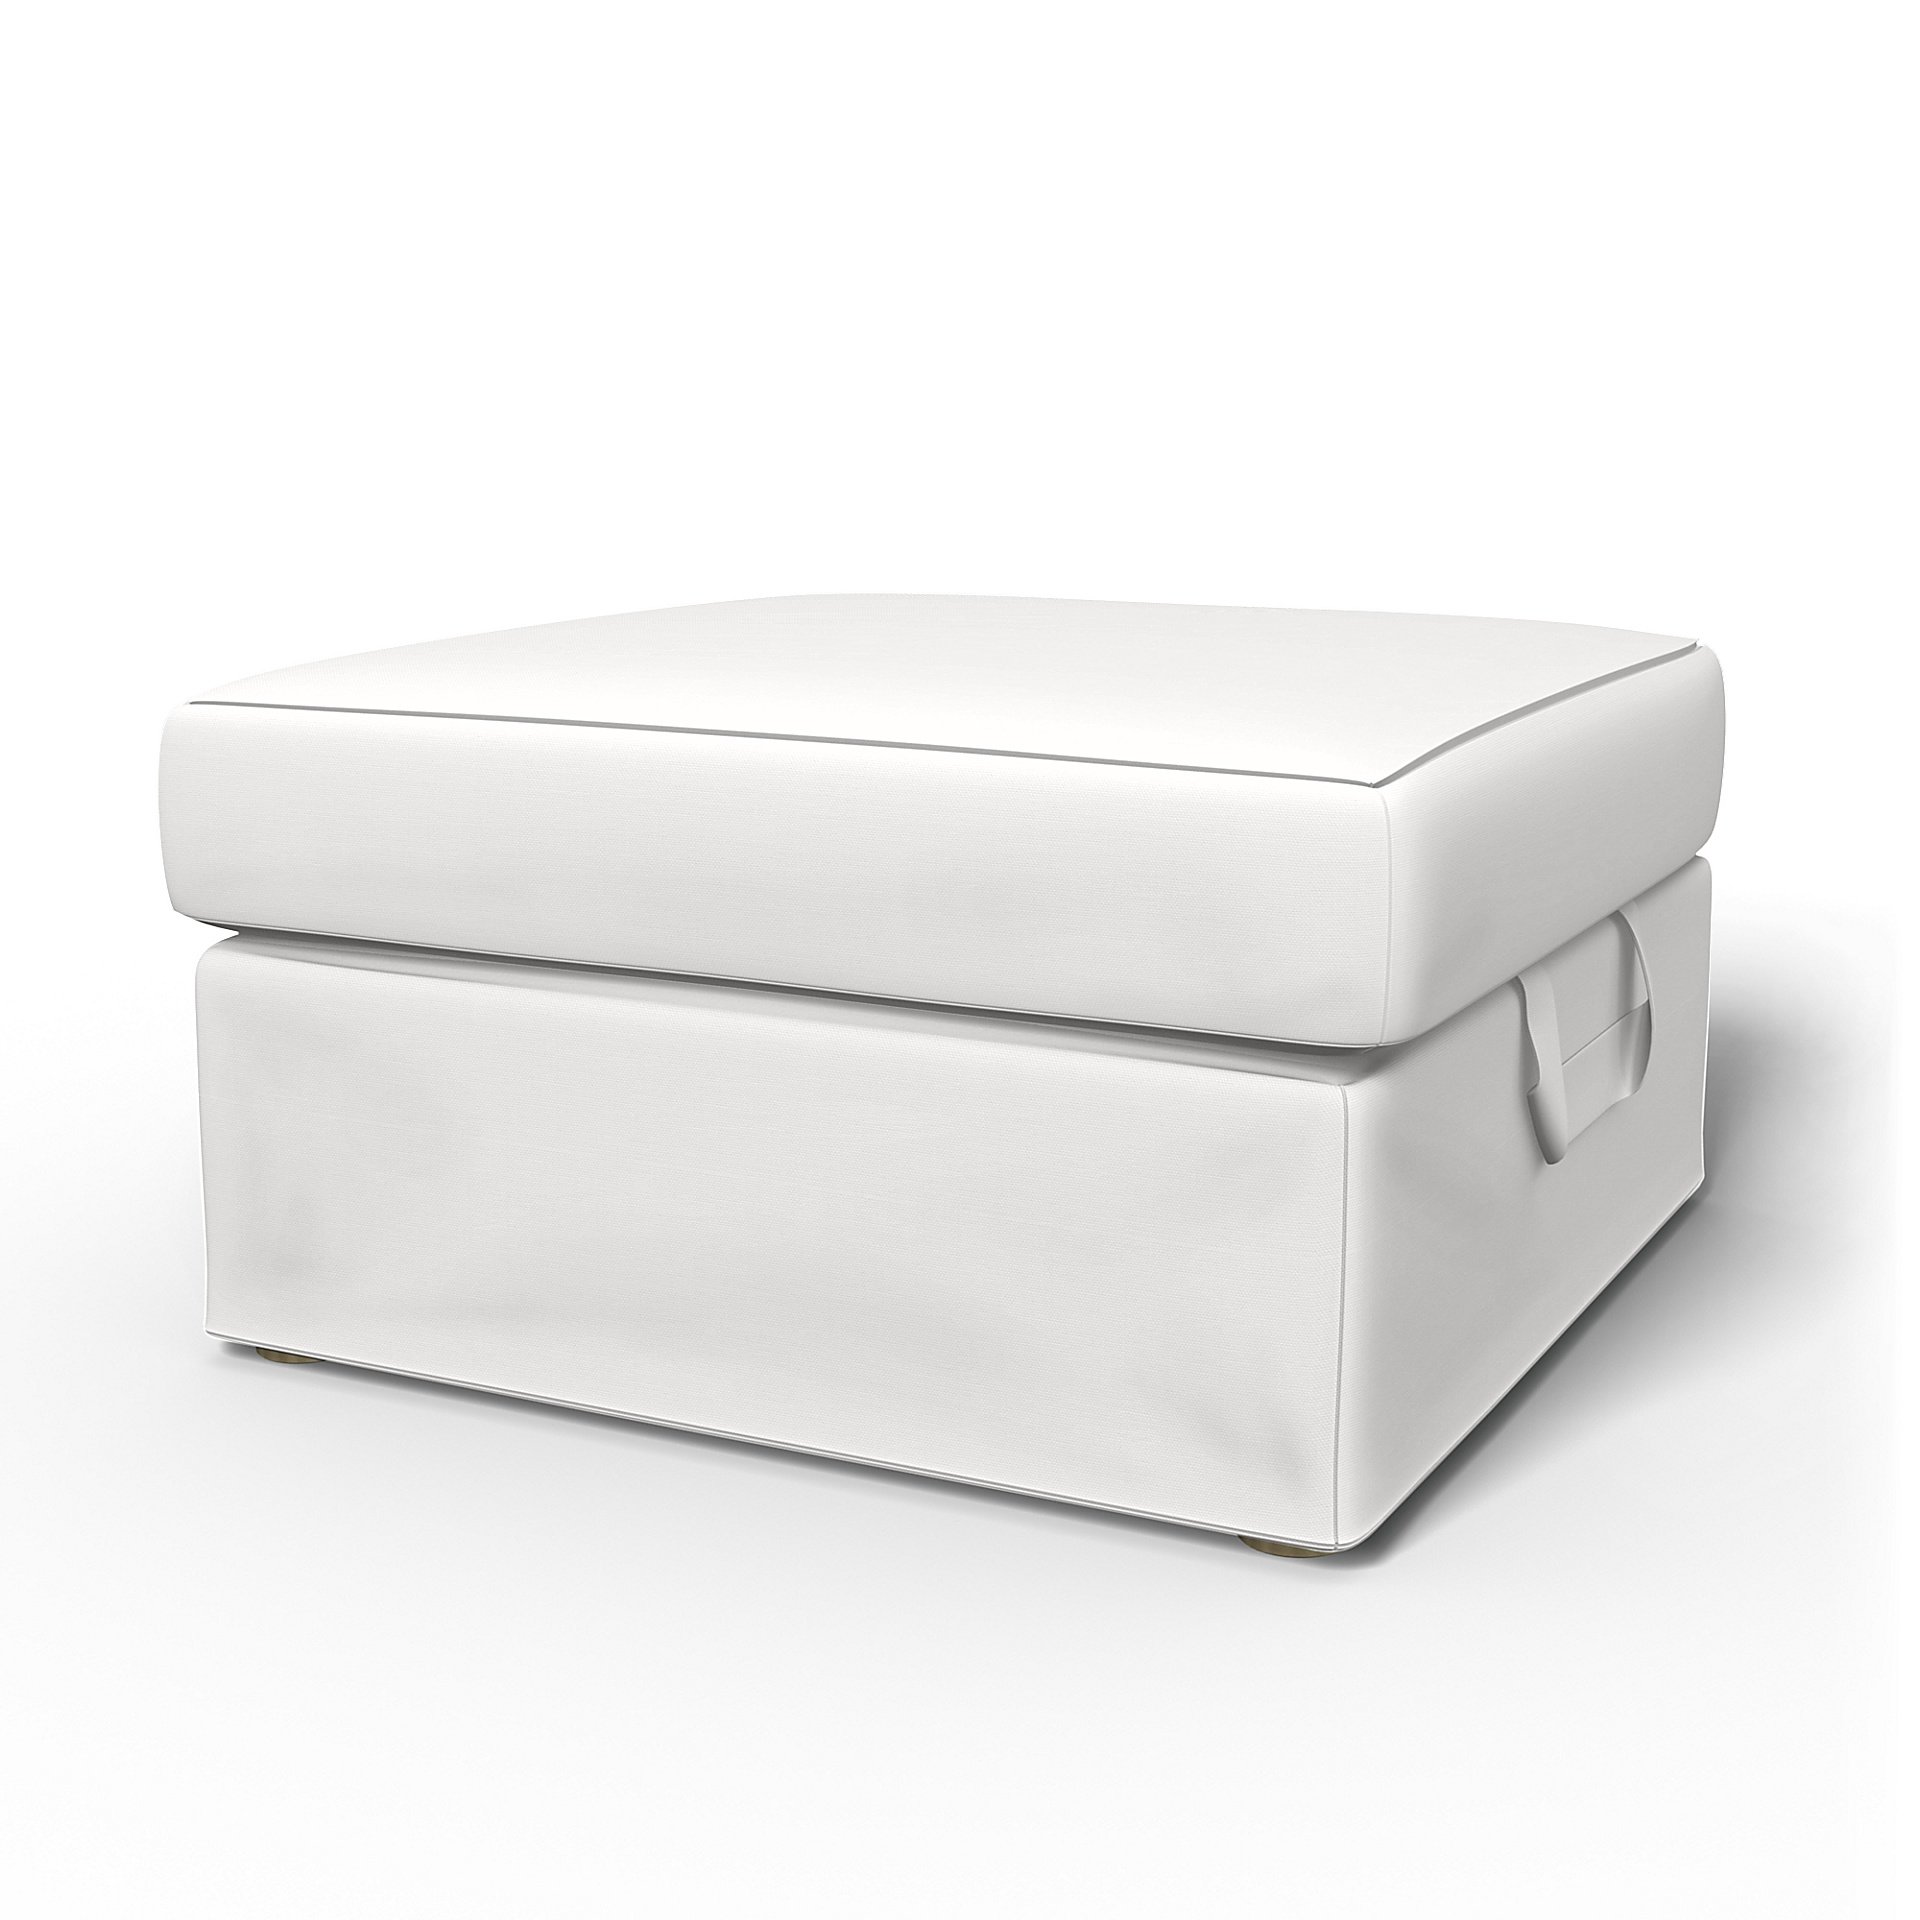 IKEA - Tomelilla Foto Footstool Cover, Absolute White, Cotton - Bemz